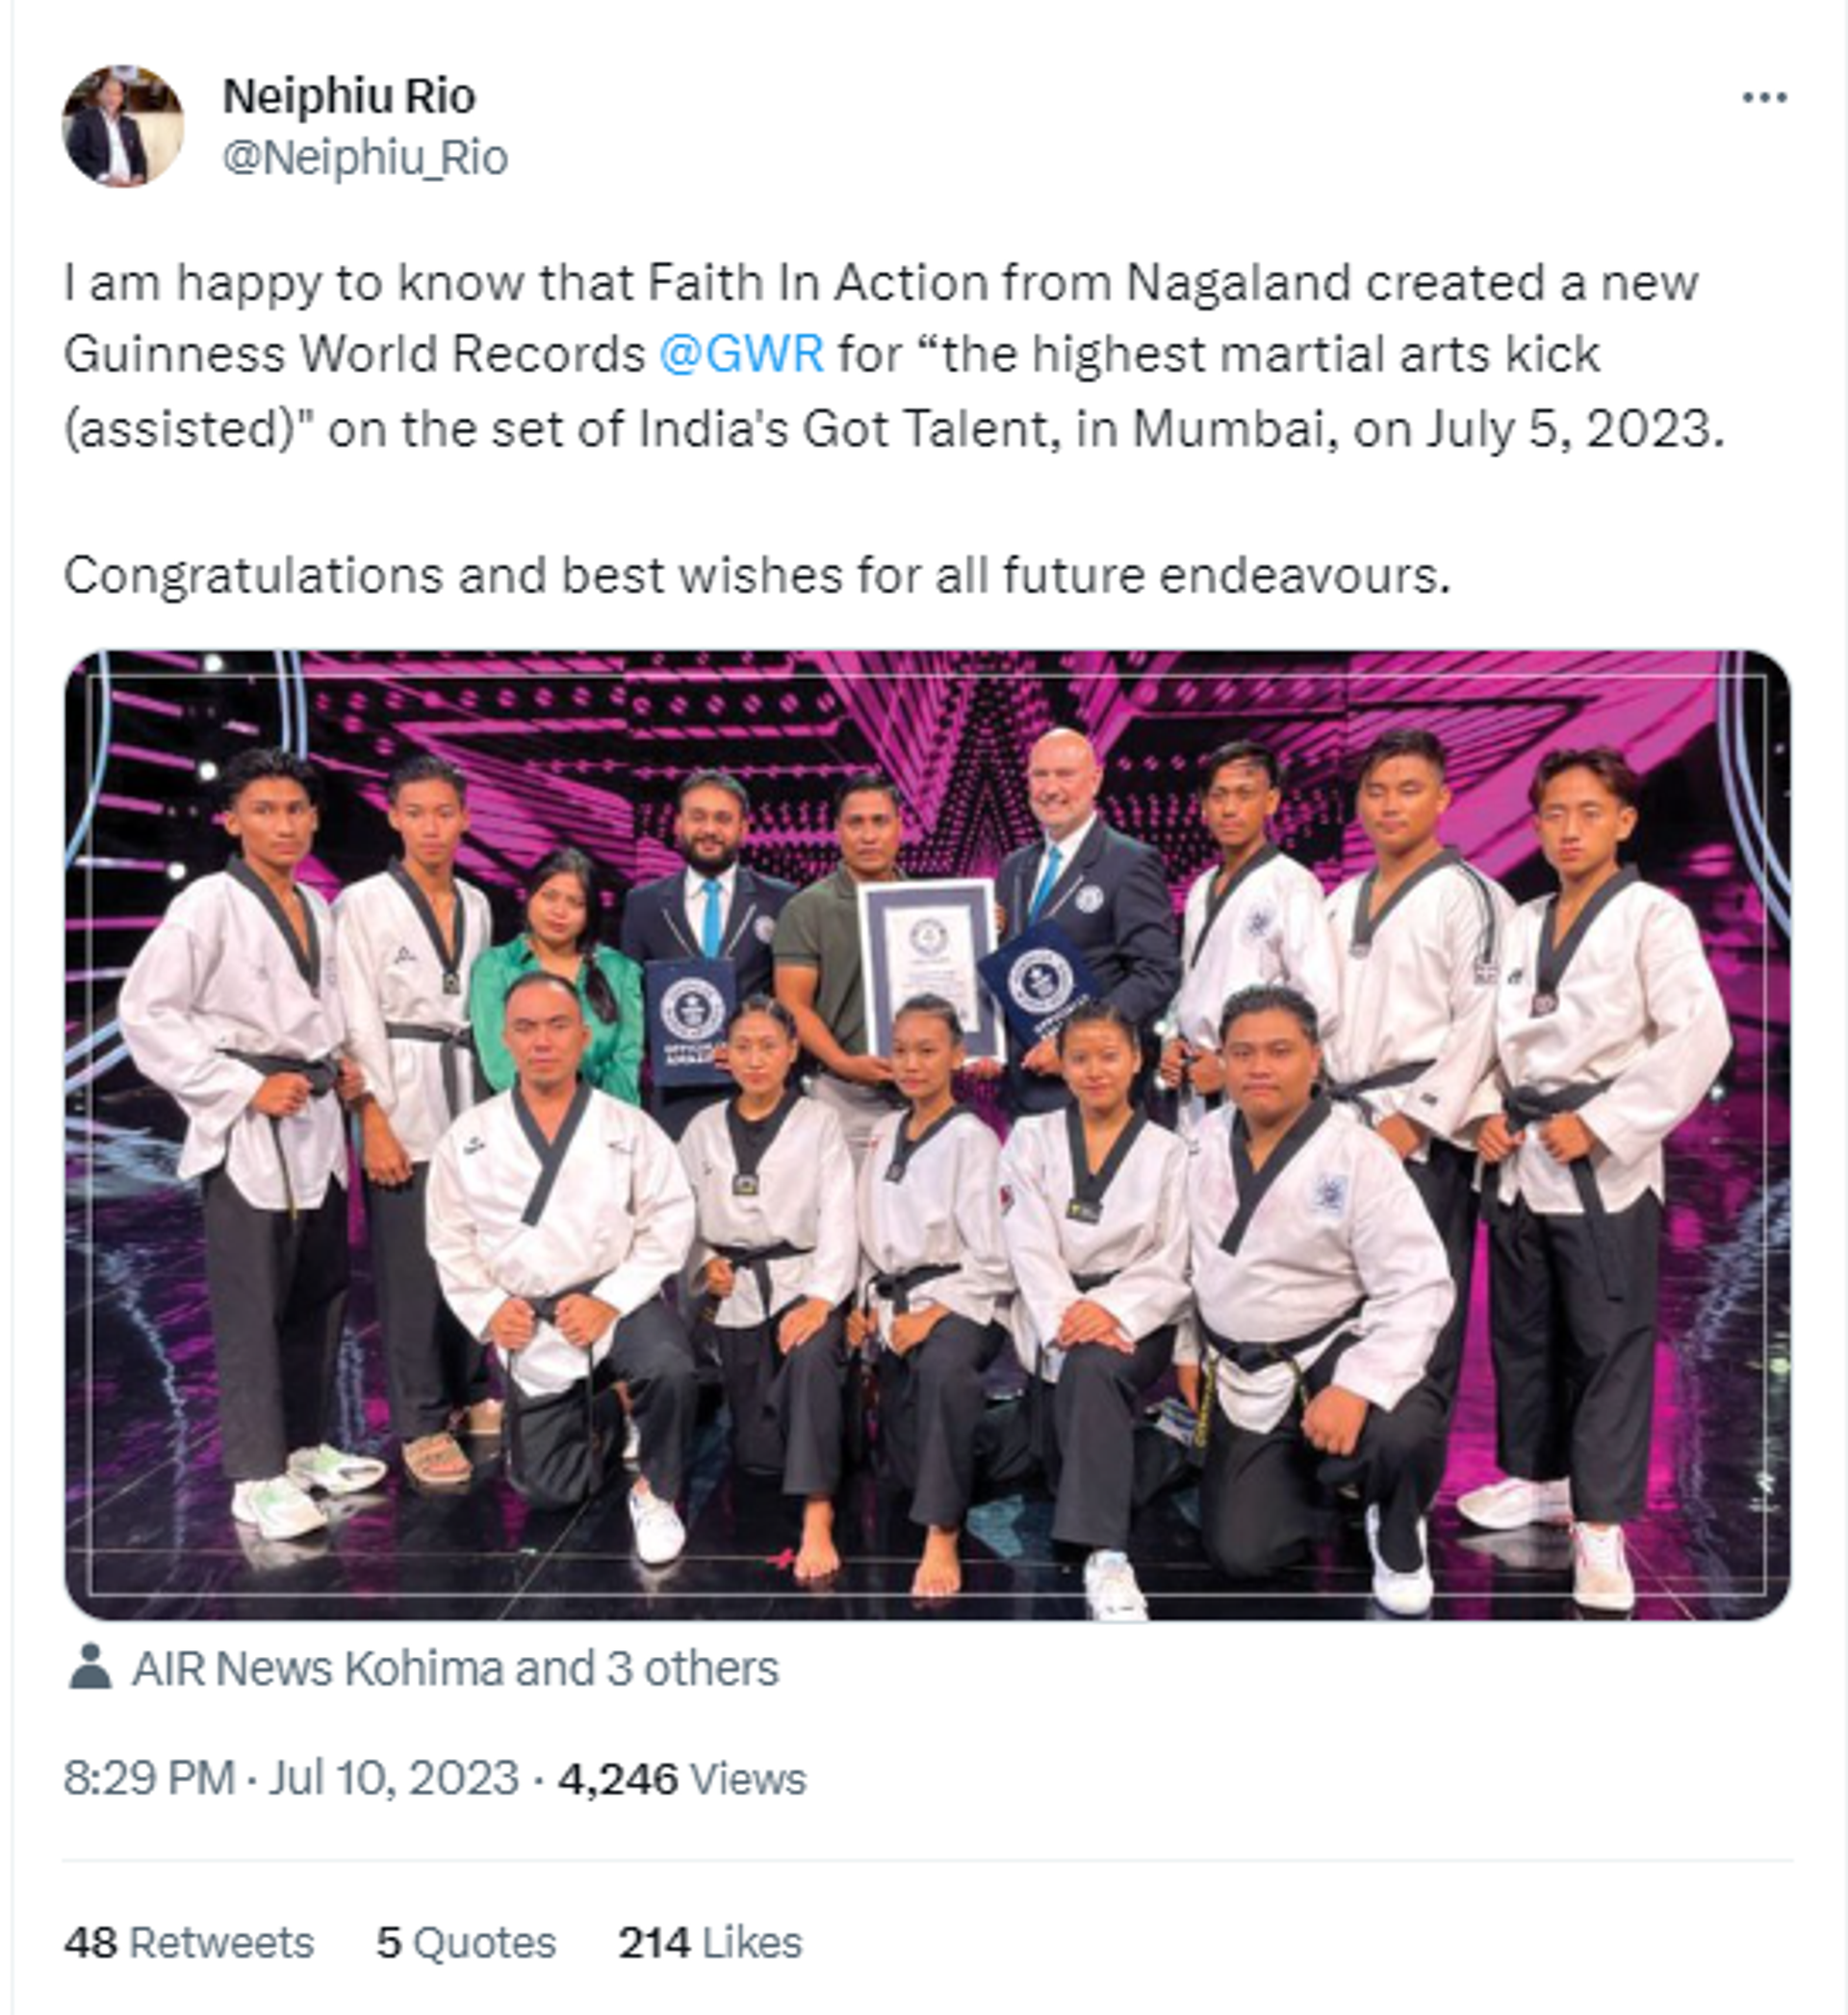 Nagaland's 'Faith in Action Academy' Sets Guinness World Record for Highest Assisted Martial Arts Kick - Sputnik India, 1920, 11.07.2023